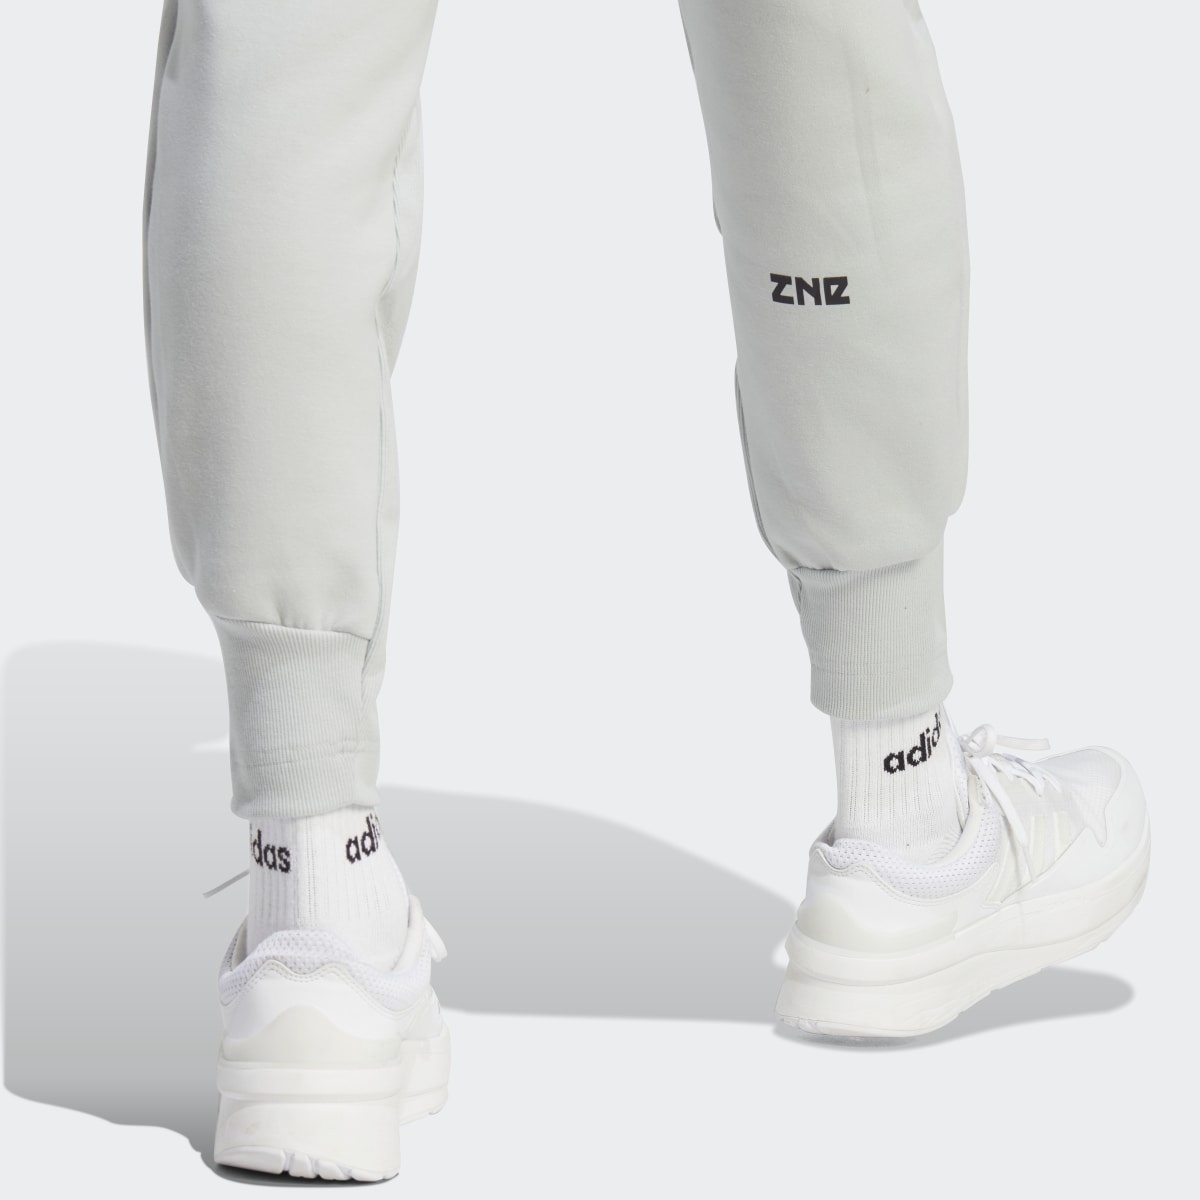 Adidas Z.N.E. Tracksuit Bottoms. 5